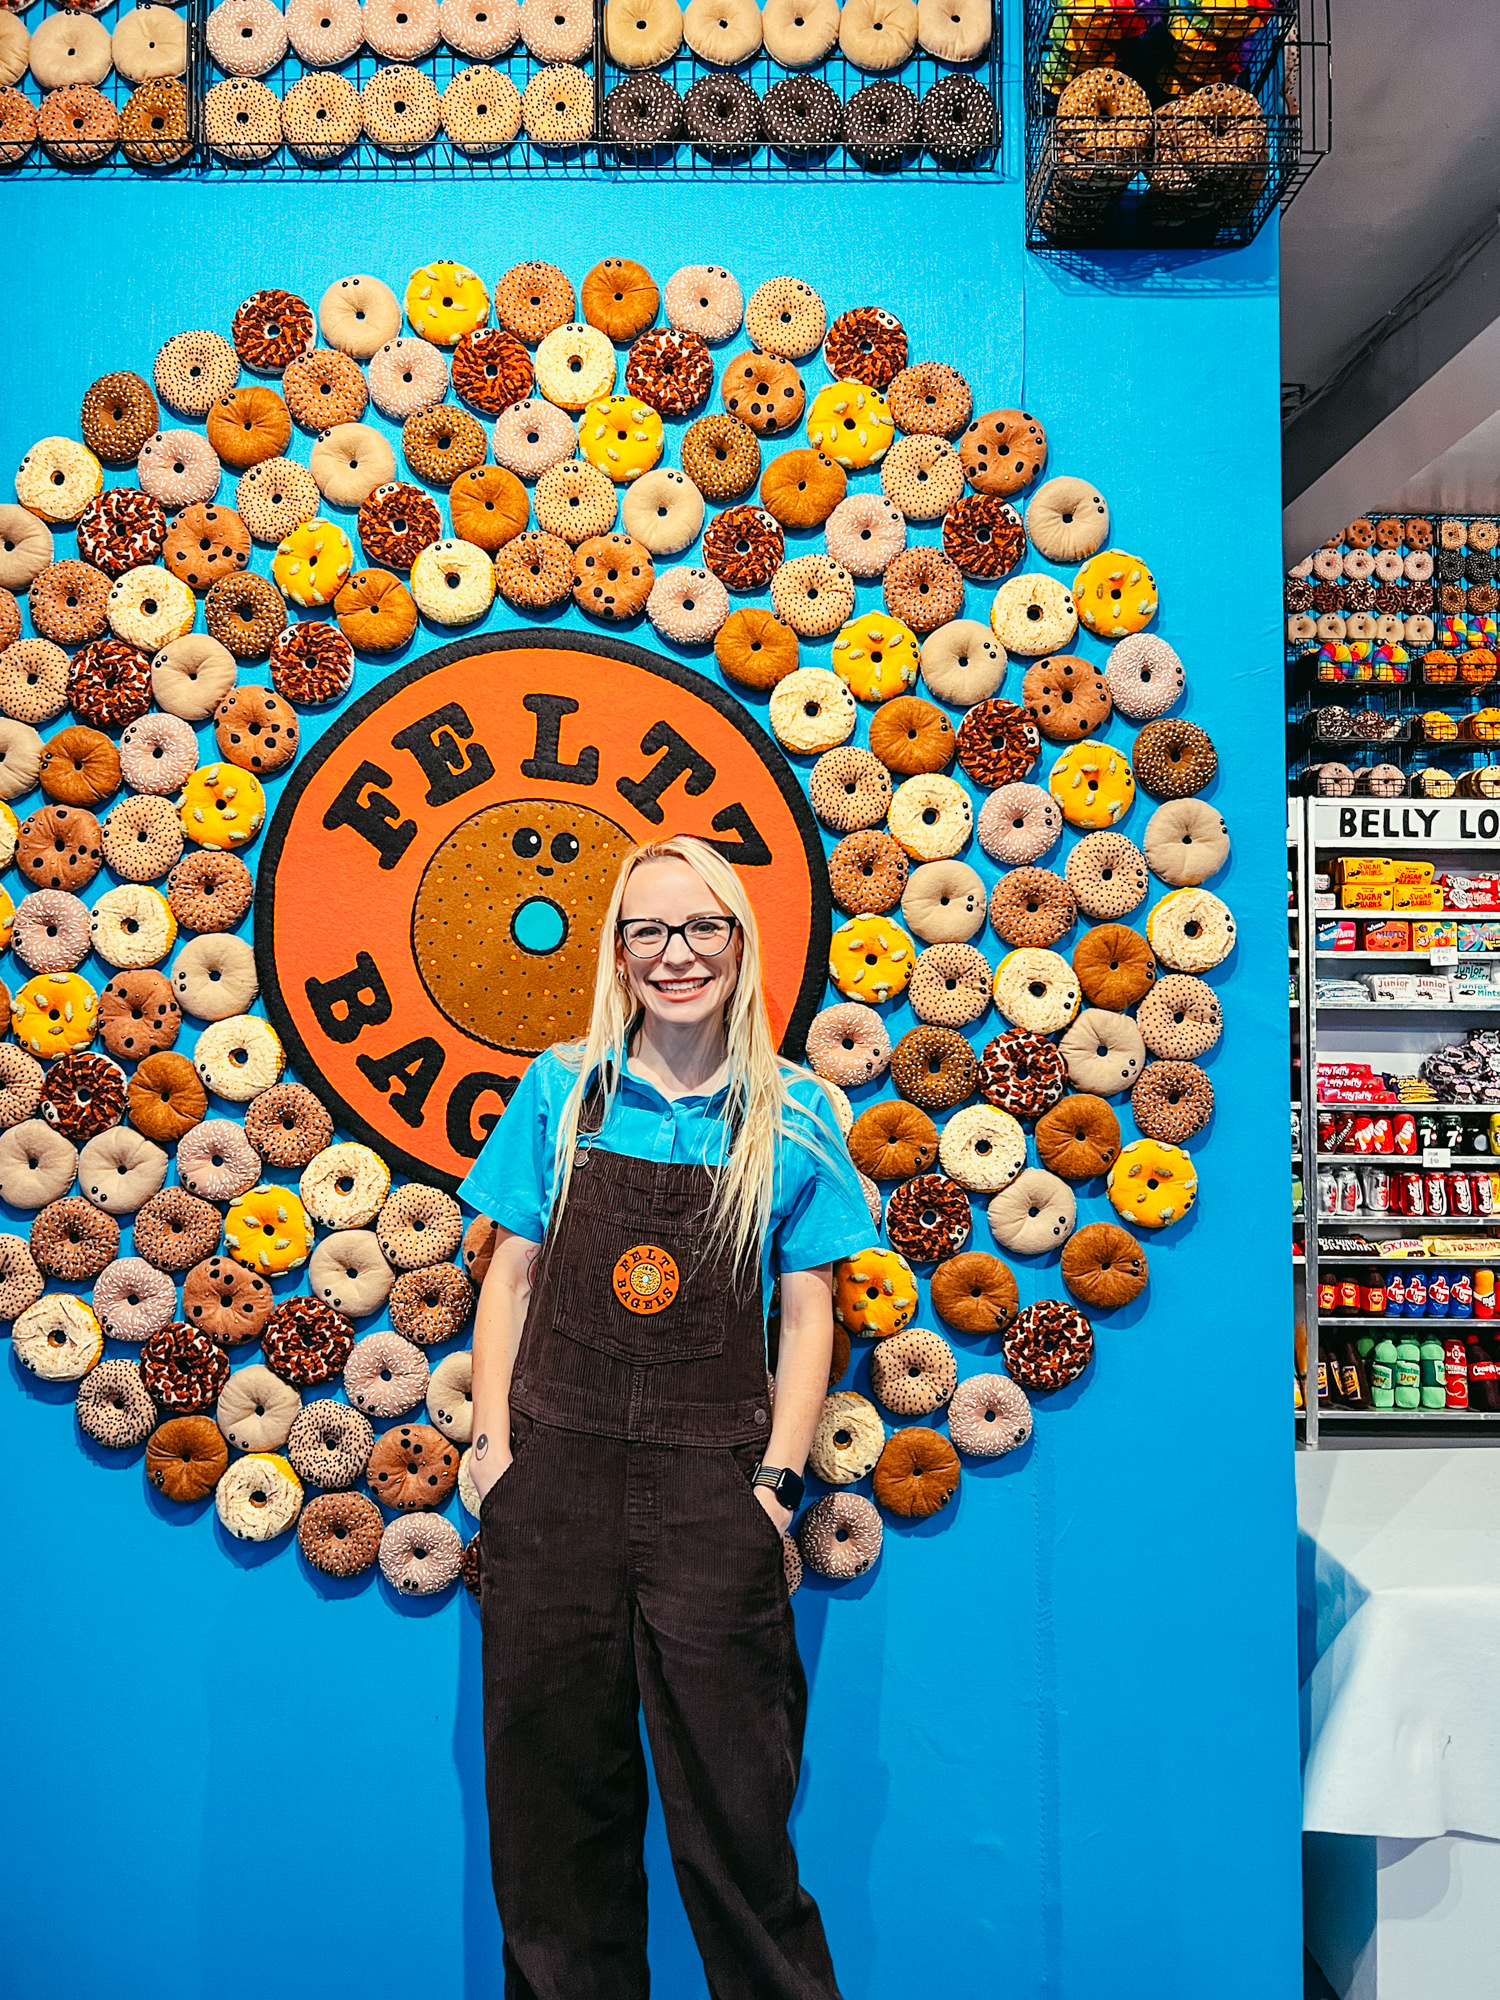 Artist Lucy Sparrow Is Back in New York With a Pop-Up Bagel Shop